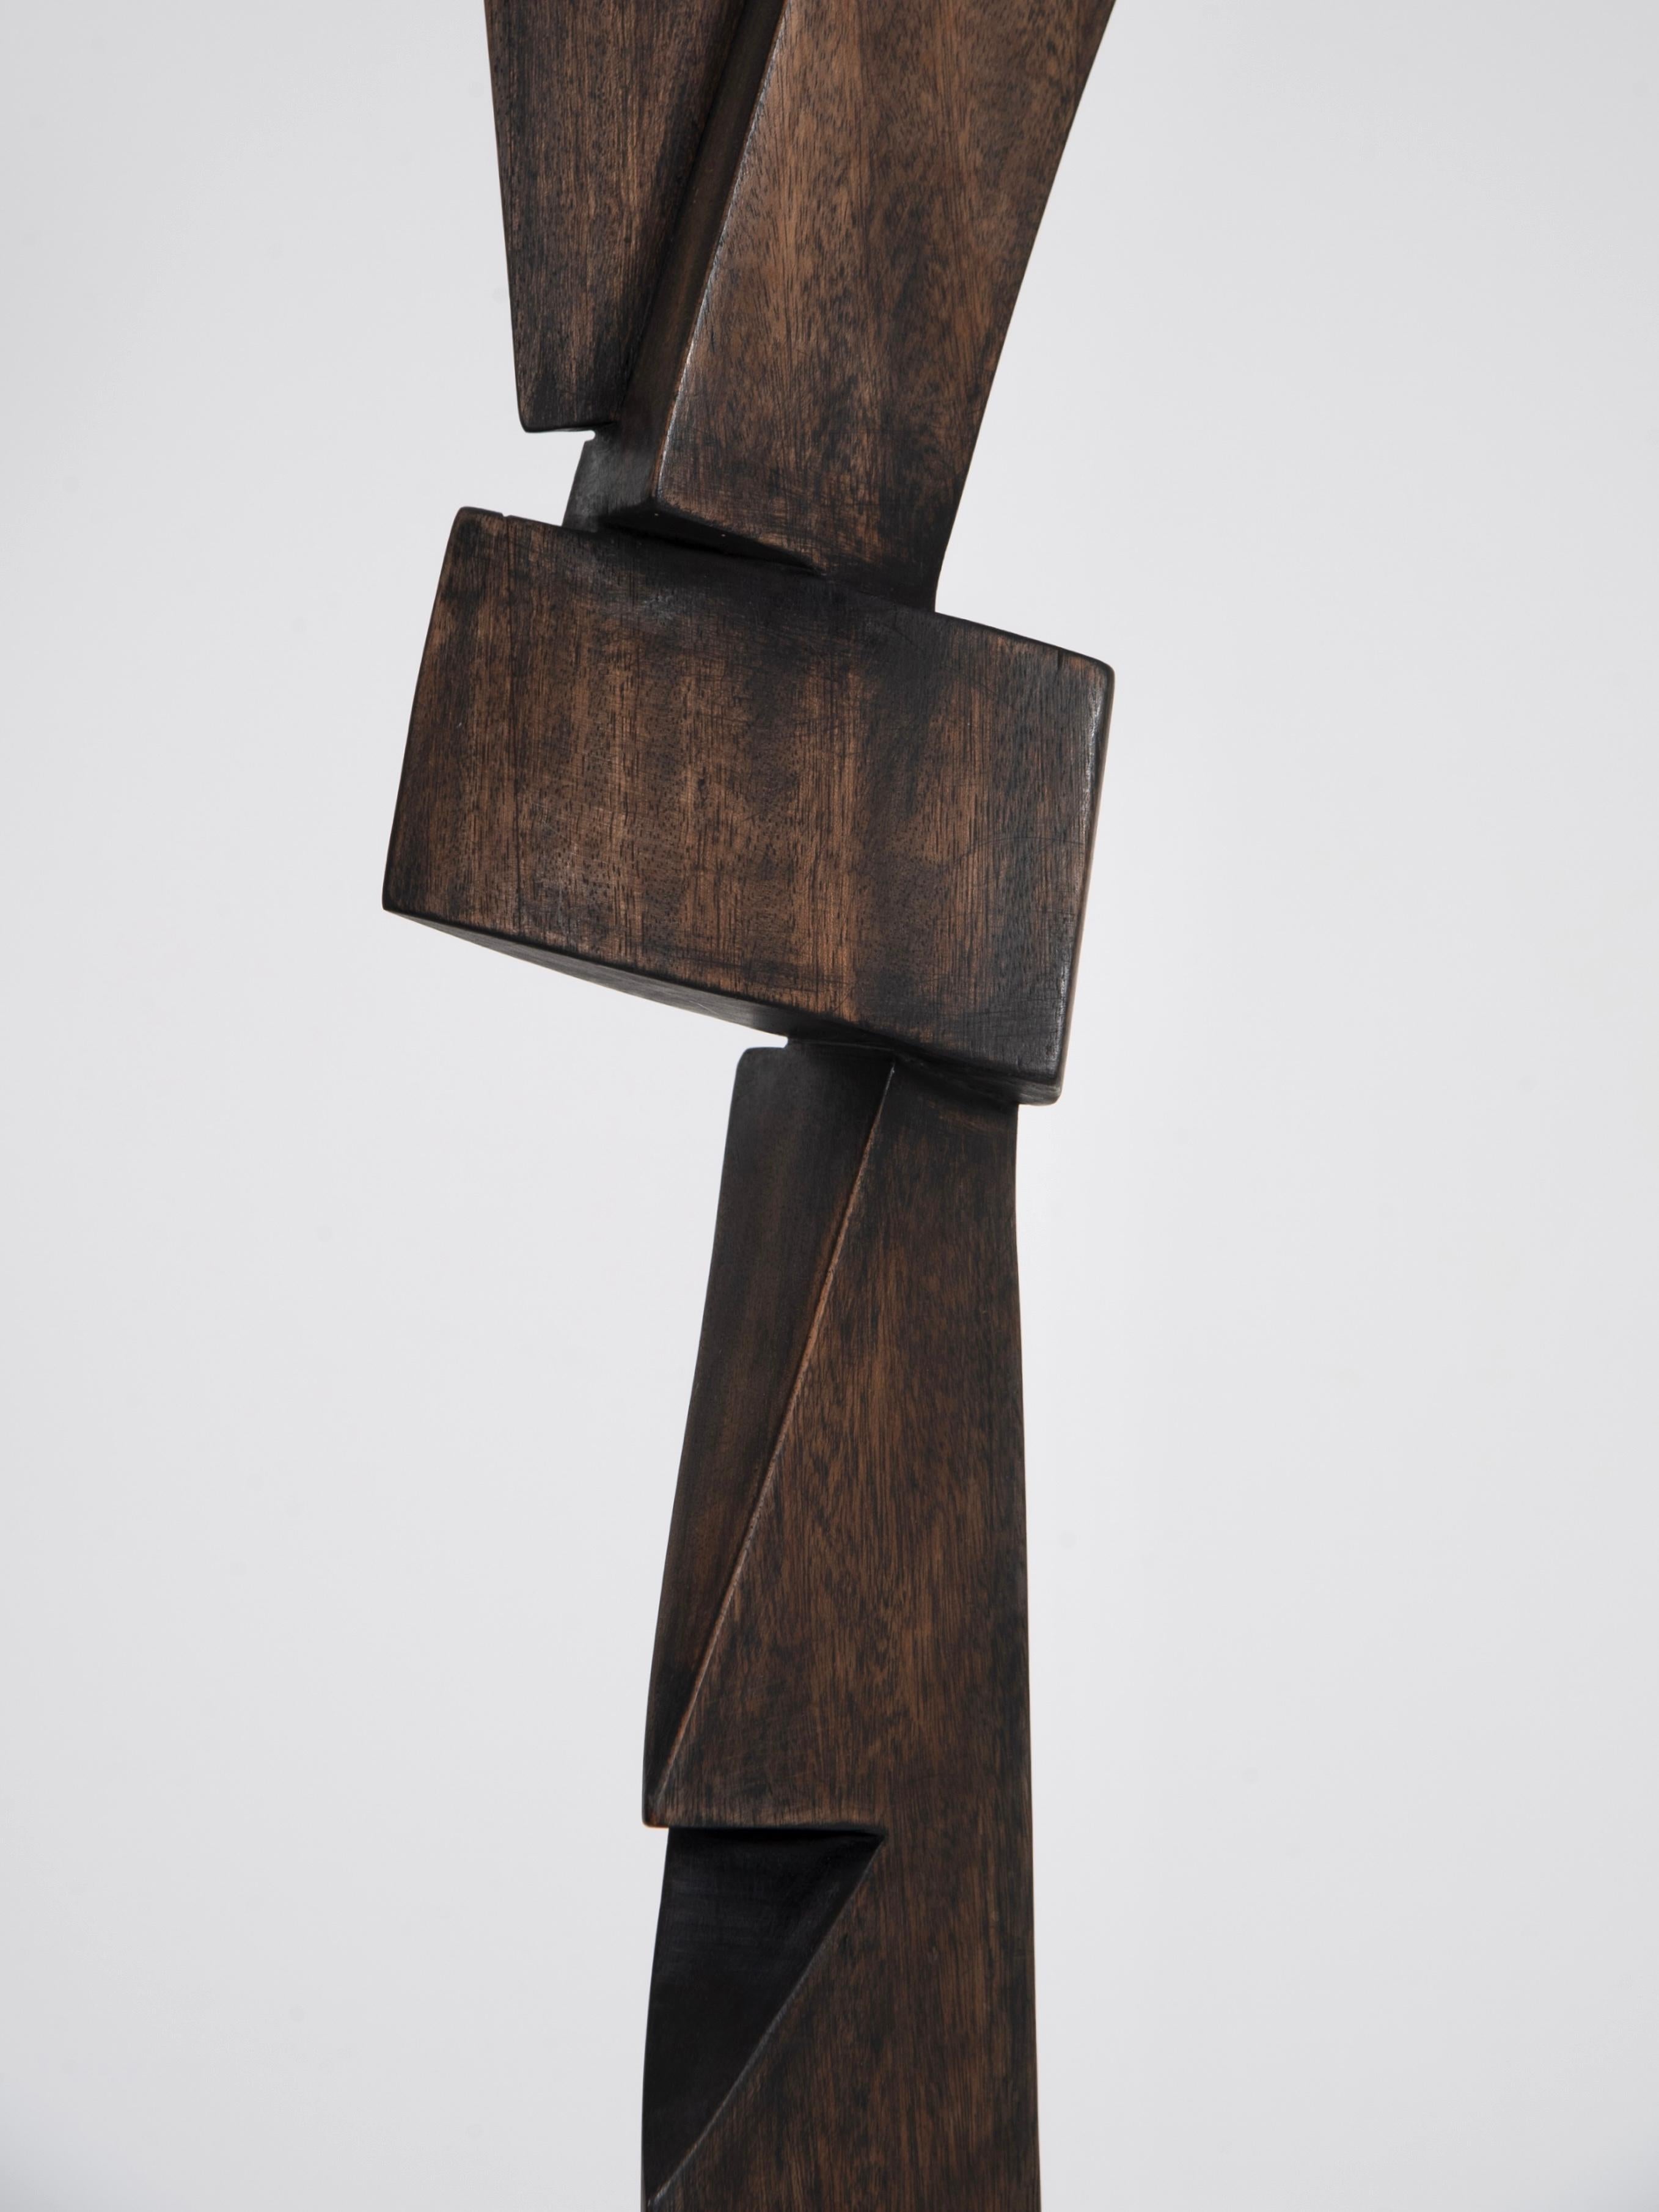 French 20th Century Modern Abstract TOTEM Sculpture by Bertrand Créach For Sale